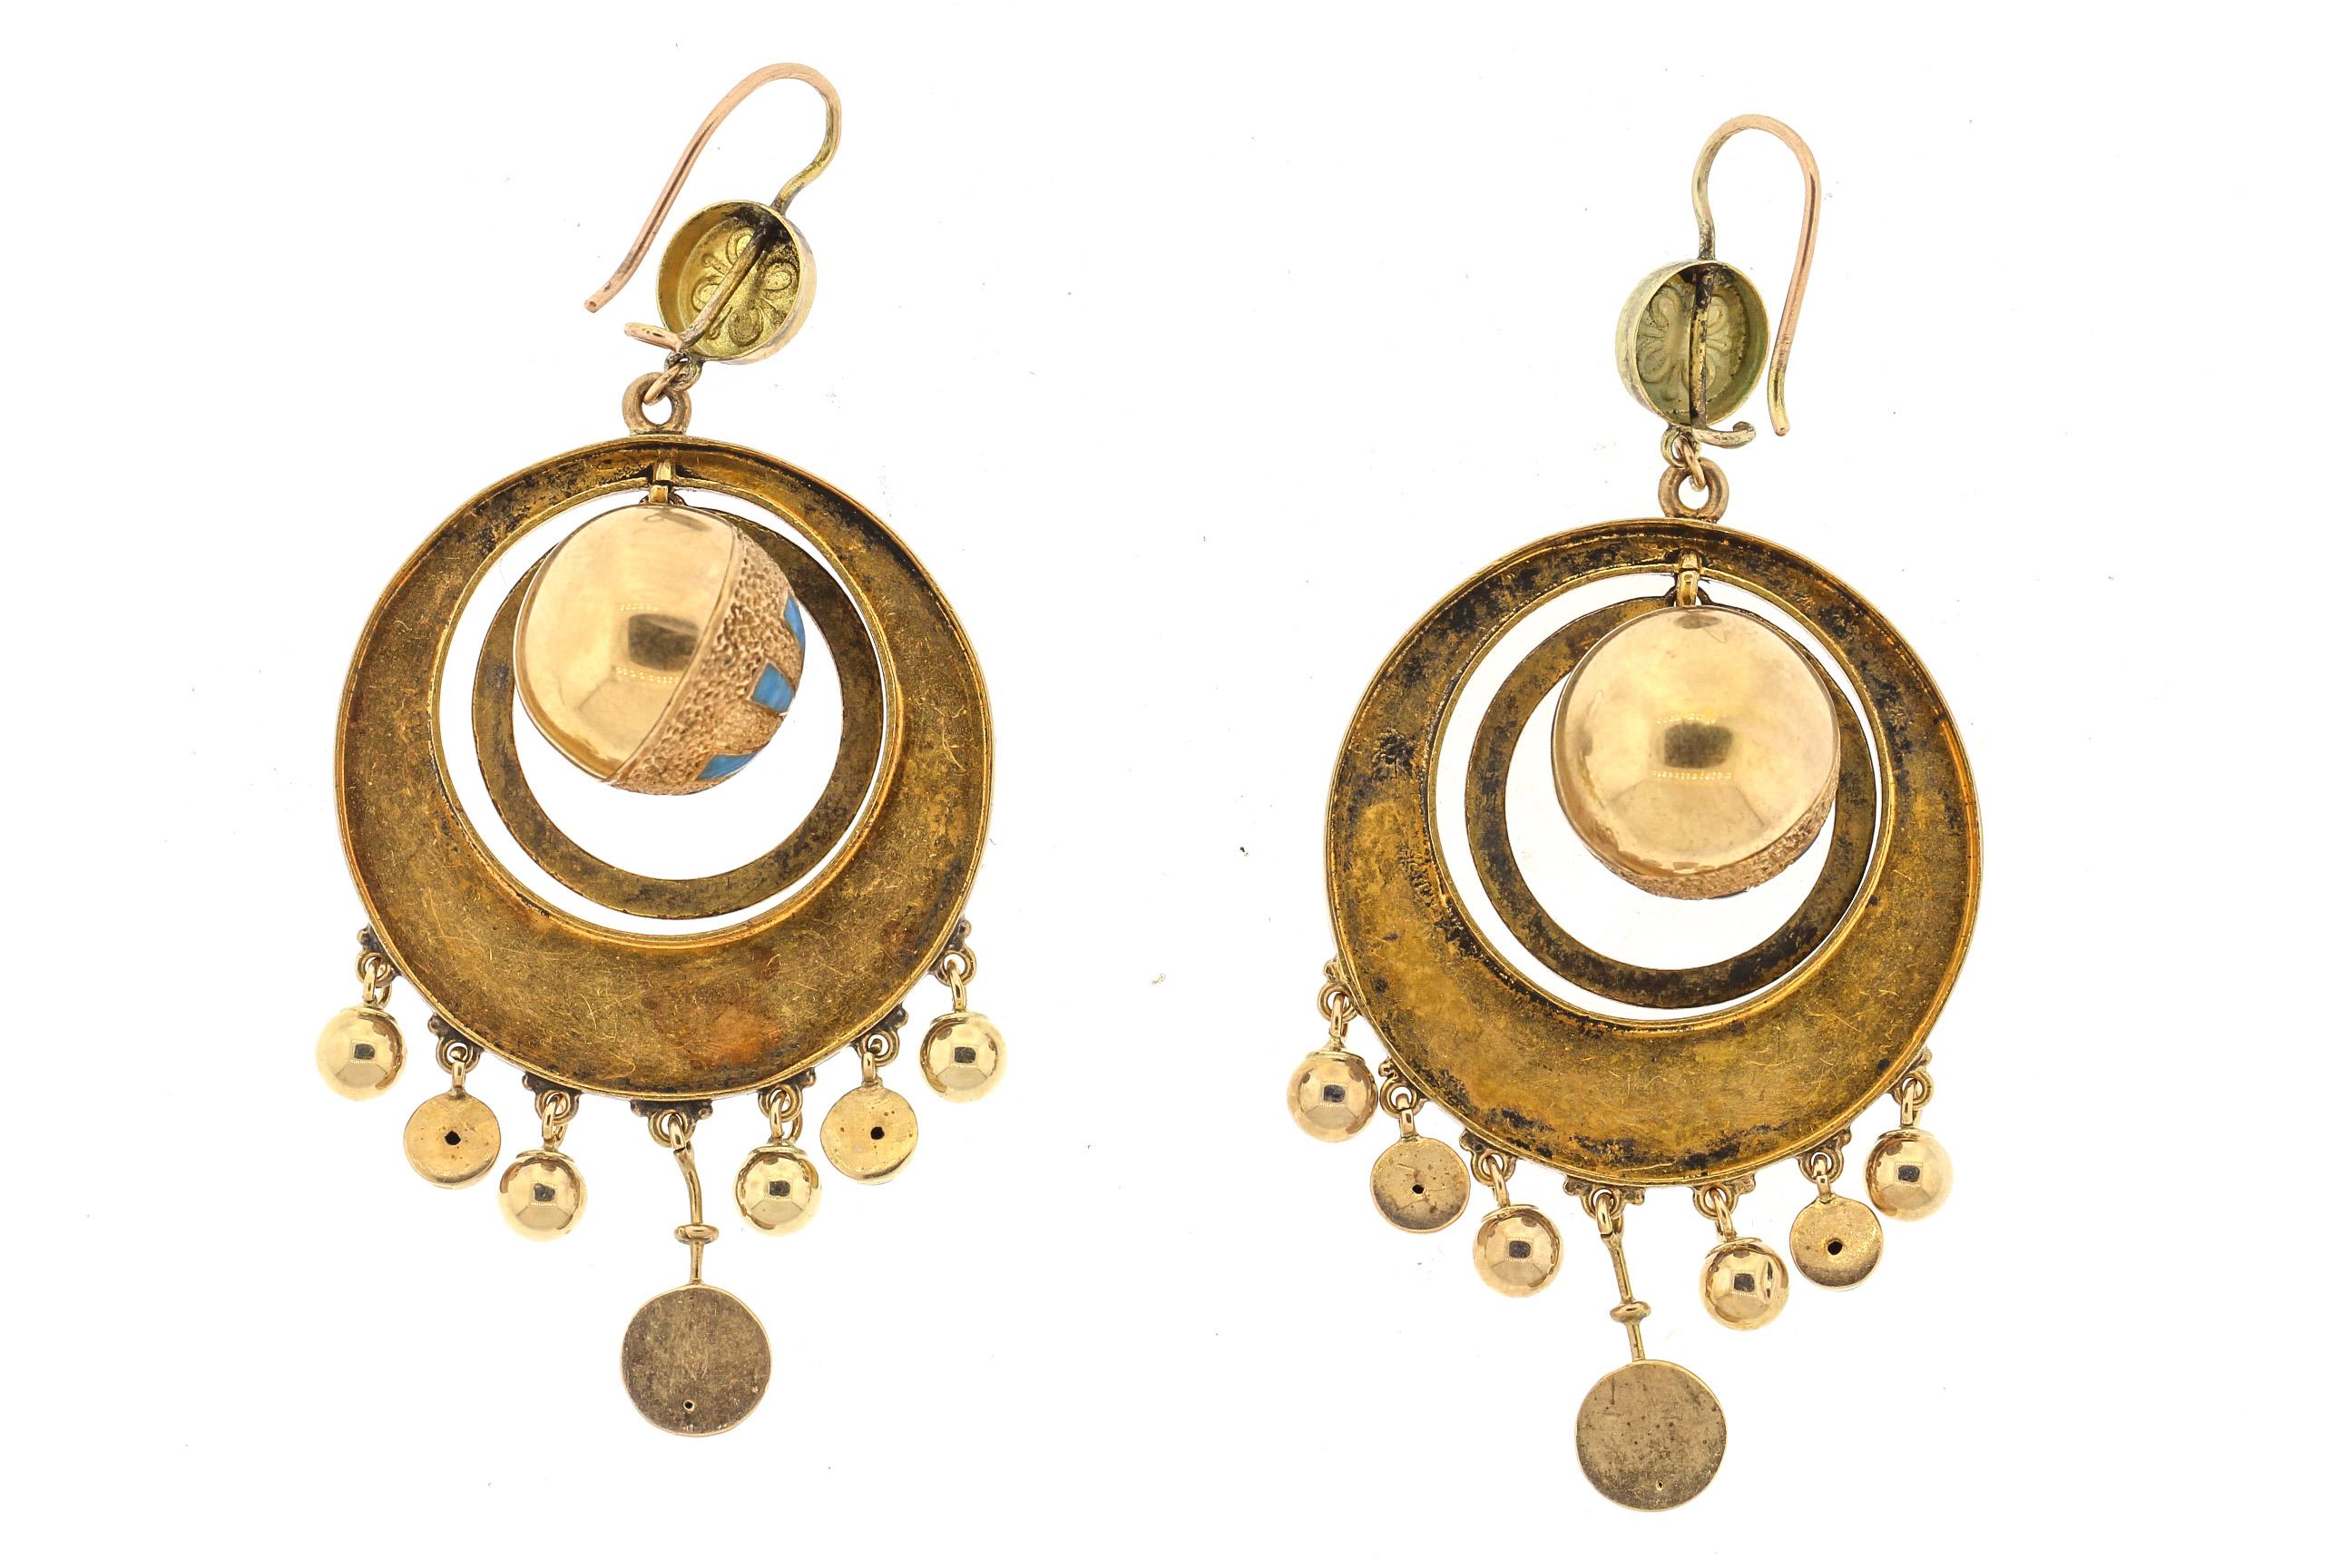 A swingy pair of Victorian 14k gold blue enamel drop earrings. These earrings are several moving circles surrounding a ball with fringe dangles on the outer circle. Quite a design of fun moving earrings. The blue enamel accents only add to these